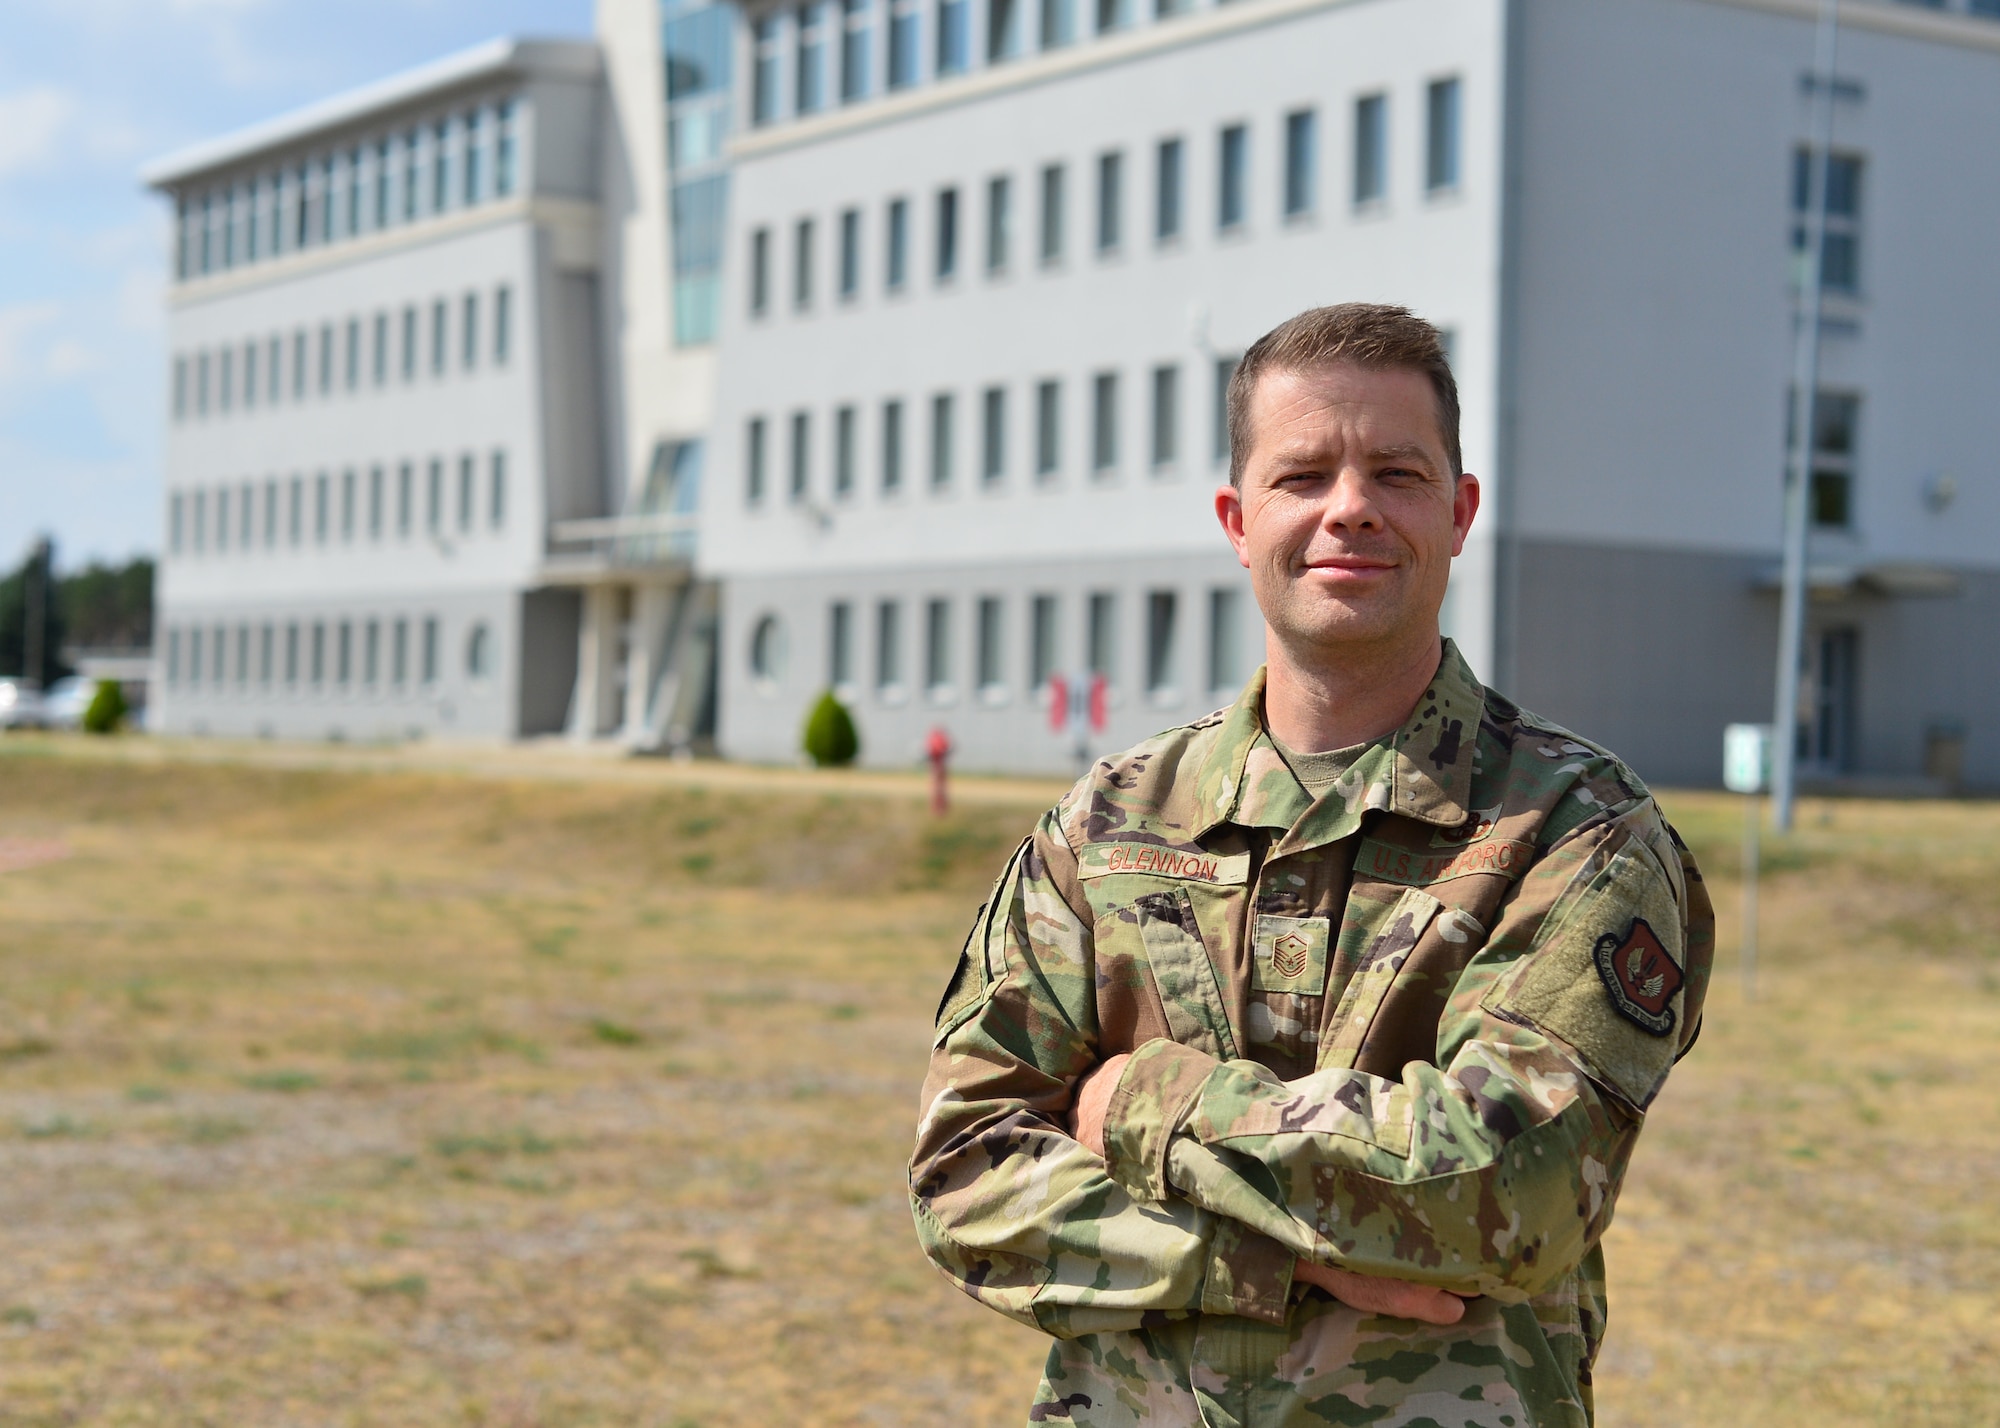 U.S. Air Force Master Sgt. Patrick Glennon, 37th Airlift Squadron first sergeant, stands outside air traffic control tower at Powidz Air Base, Poland, July 20, 2019. During Aviation Rotation 19-3, Glennon was integral to the morale and welfare of the Airmen supporting the missions by assisting with transportation, communication, and event planning. (U.S. Air Force photo by Staff Sgt. Jimmie D. Pike)